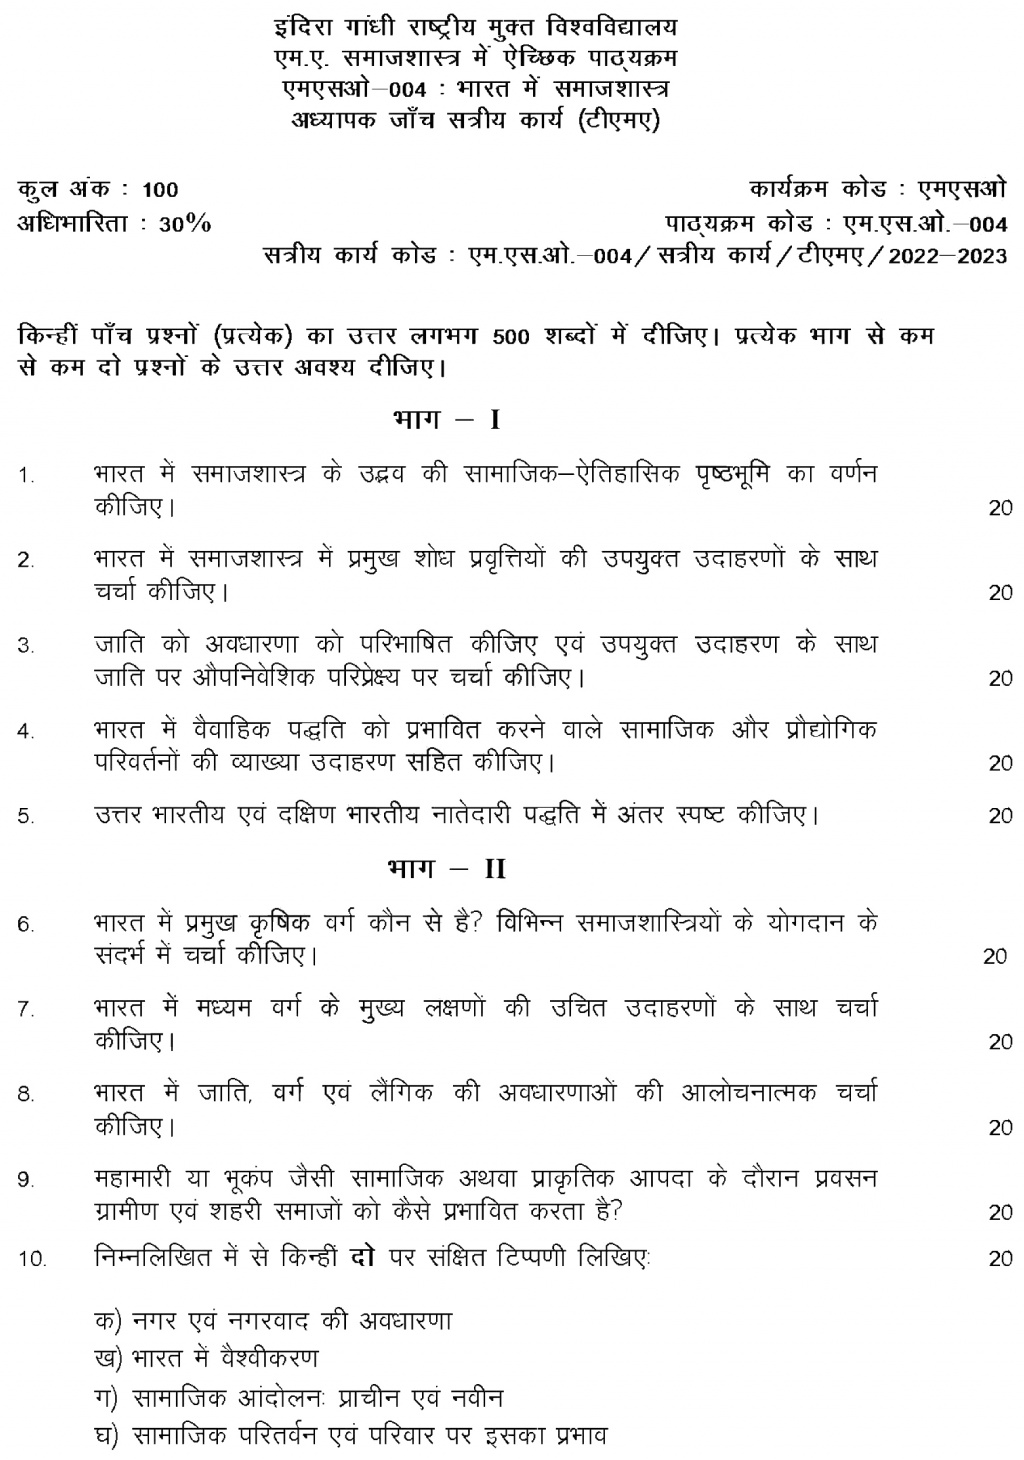 IGNOU MSO-04 - Sociology in India, Latest Solved Assignment-July 2022 – January 2023